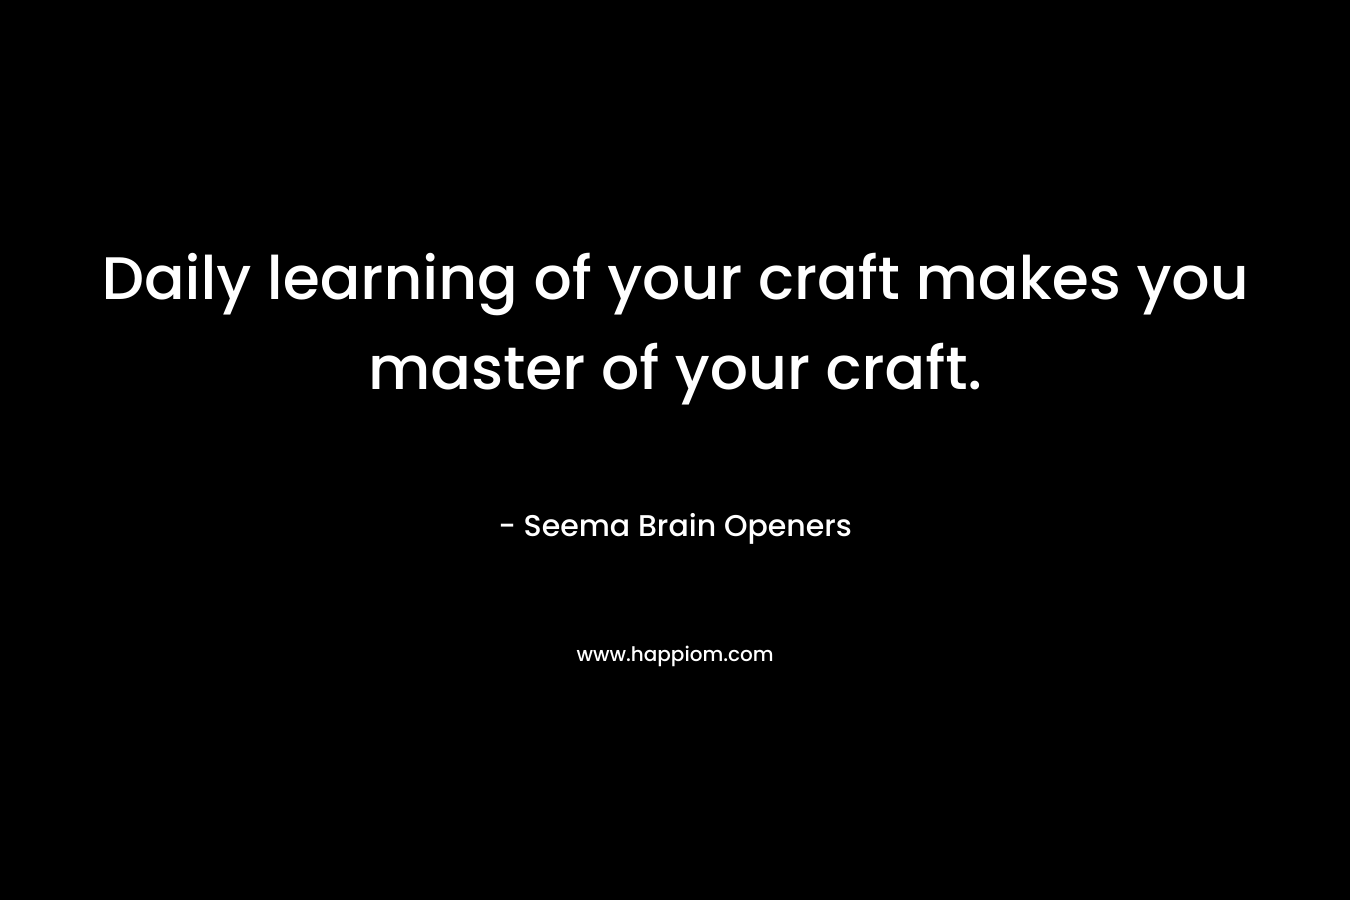 Daily learning of your craft makes you master of your craft. – Seema Brain Openers